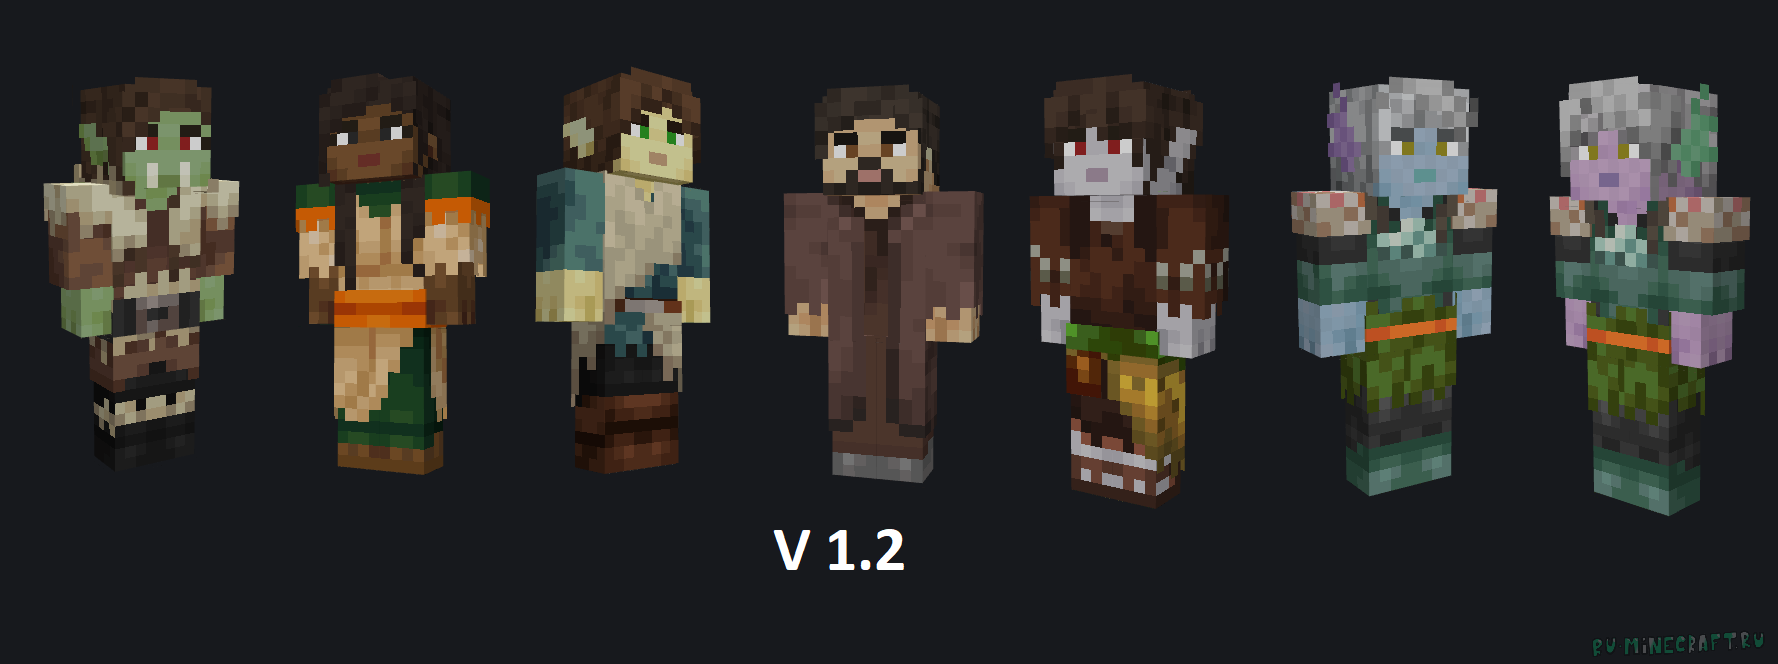 Player villagers